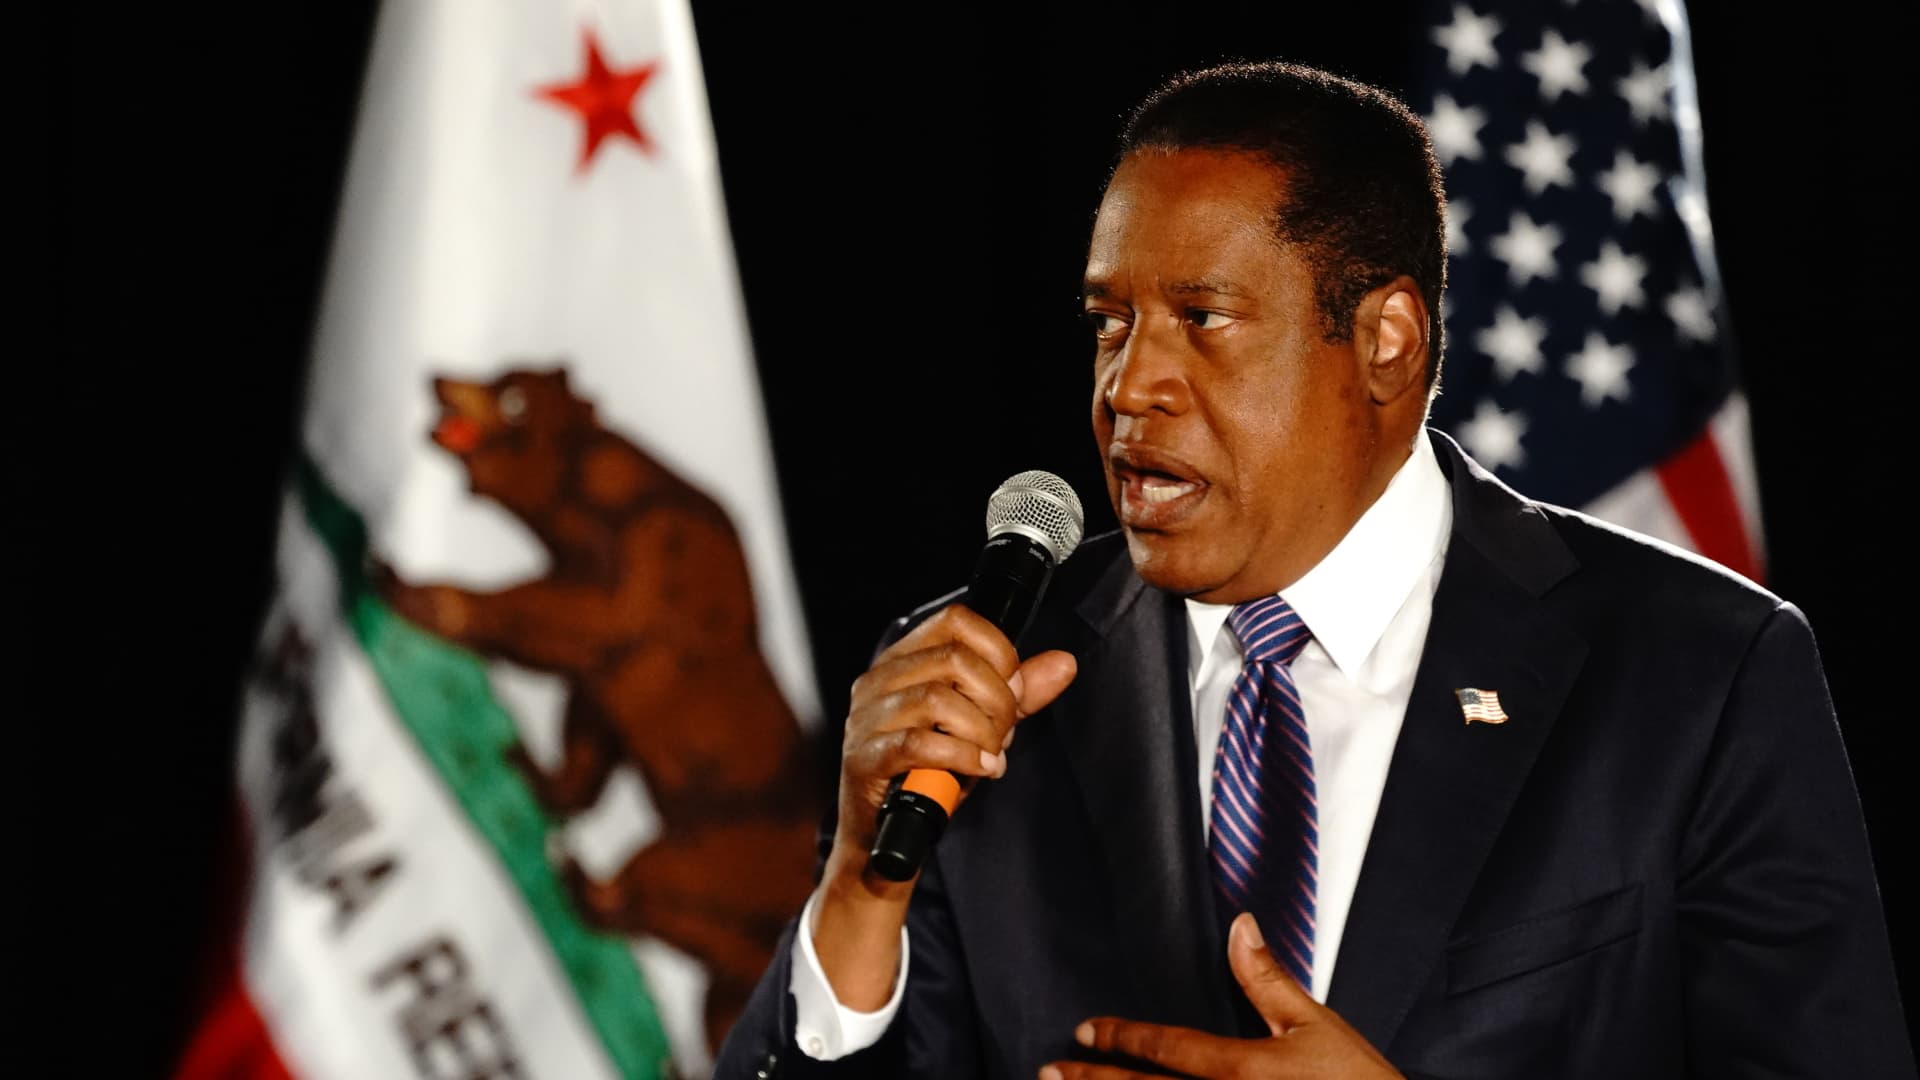 Larry Elder, Republican gubernatorial candidate for California, speaks at a campaign watch party after losing the gubernatorial recall election in Costa Mesa, California, U.S., on Tuesday, Sept. 14, 2021.